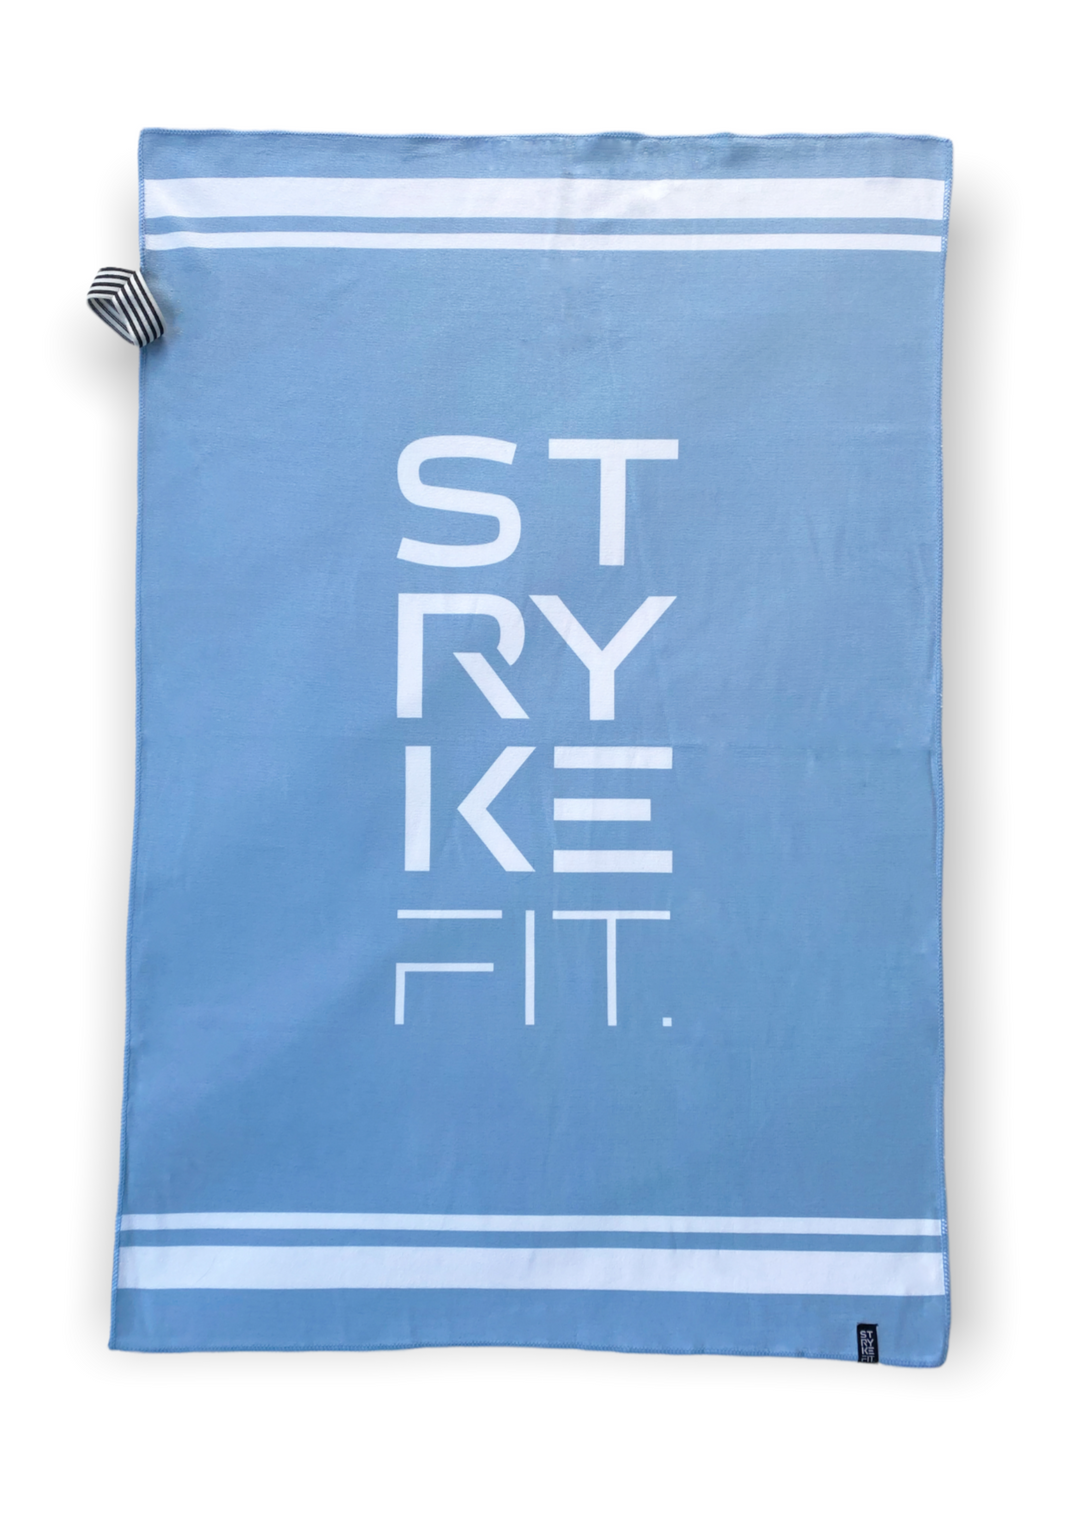 TRAINING TOWEL  -The perfect training towel is important to any training session. Our towel is designed to ensure you stay dry through any workout, whether your go-to is running, yoga, pilates, gym, or any other sport. Lightweight and compact, the perfect size to throw in your training bag, this towel will be a staple.